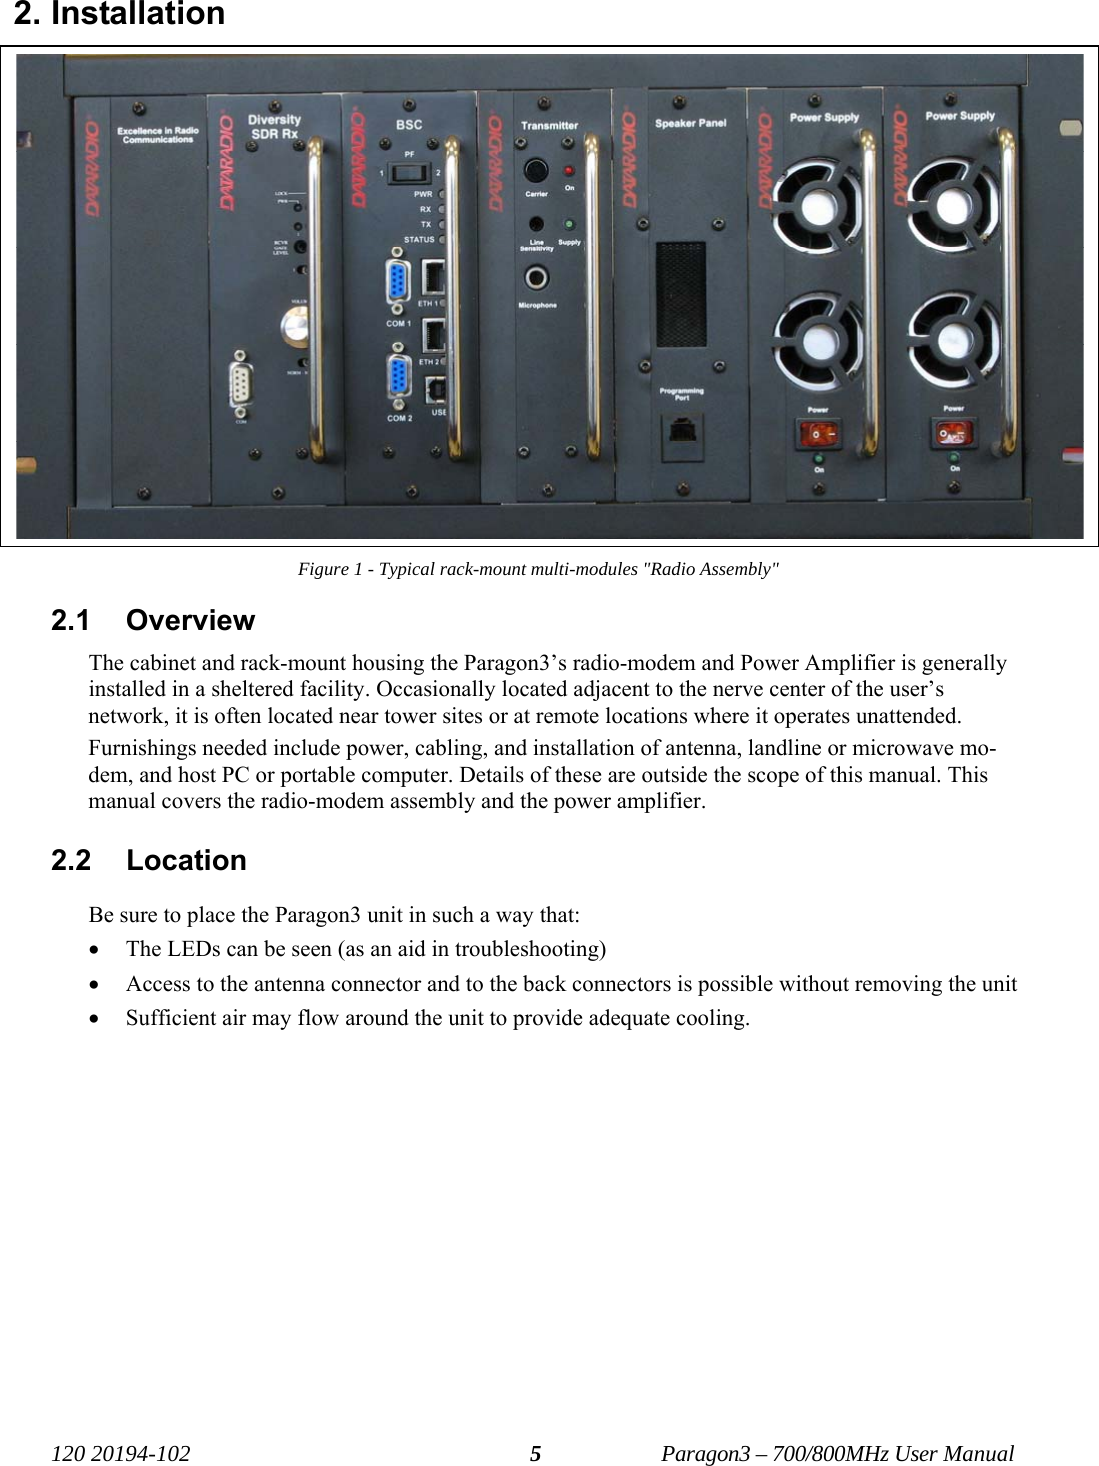   120 20194-102   Paragon3 – 700/800MHz User Manual 52. Installation Figure 1 - Typical rack-mount multi-modules &quot;Radio Assembly&quot; 2.1 Overview The cabinet and rack-mount housing the Paragon3’s radio-modem and Power Amplifier is generally installed in a sheltered facility. Occasionally located adjacent to the nerve center of the user’s network, it is often located near tower sites or at remote locations where it operates unattended. Furnishings needed include power, cabling, and installation of antenna, landline or microwave mo-dem, and host PC or portable computer. Details of these are outside the scope of this manual. This manual covers the radio-modem assembly and the power amplifier. 2.2 Location Be sure to place the Paragon3 unit in such a way that: • The LEDs can be seen (as an aid in troubleshooting) • Access to the antenna connector and to the back connectors is possible without removing the unit  • Sufficient air may flow around the unit to provide adequate cooling. 